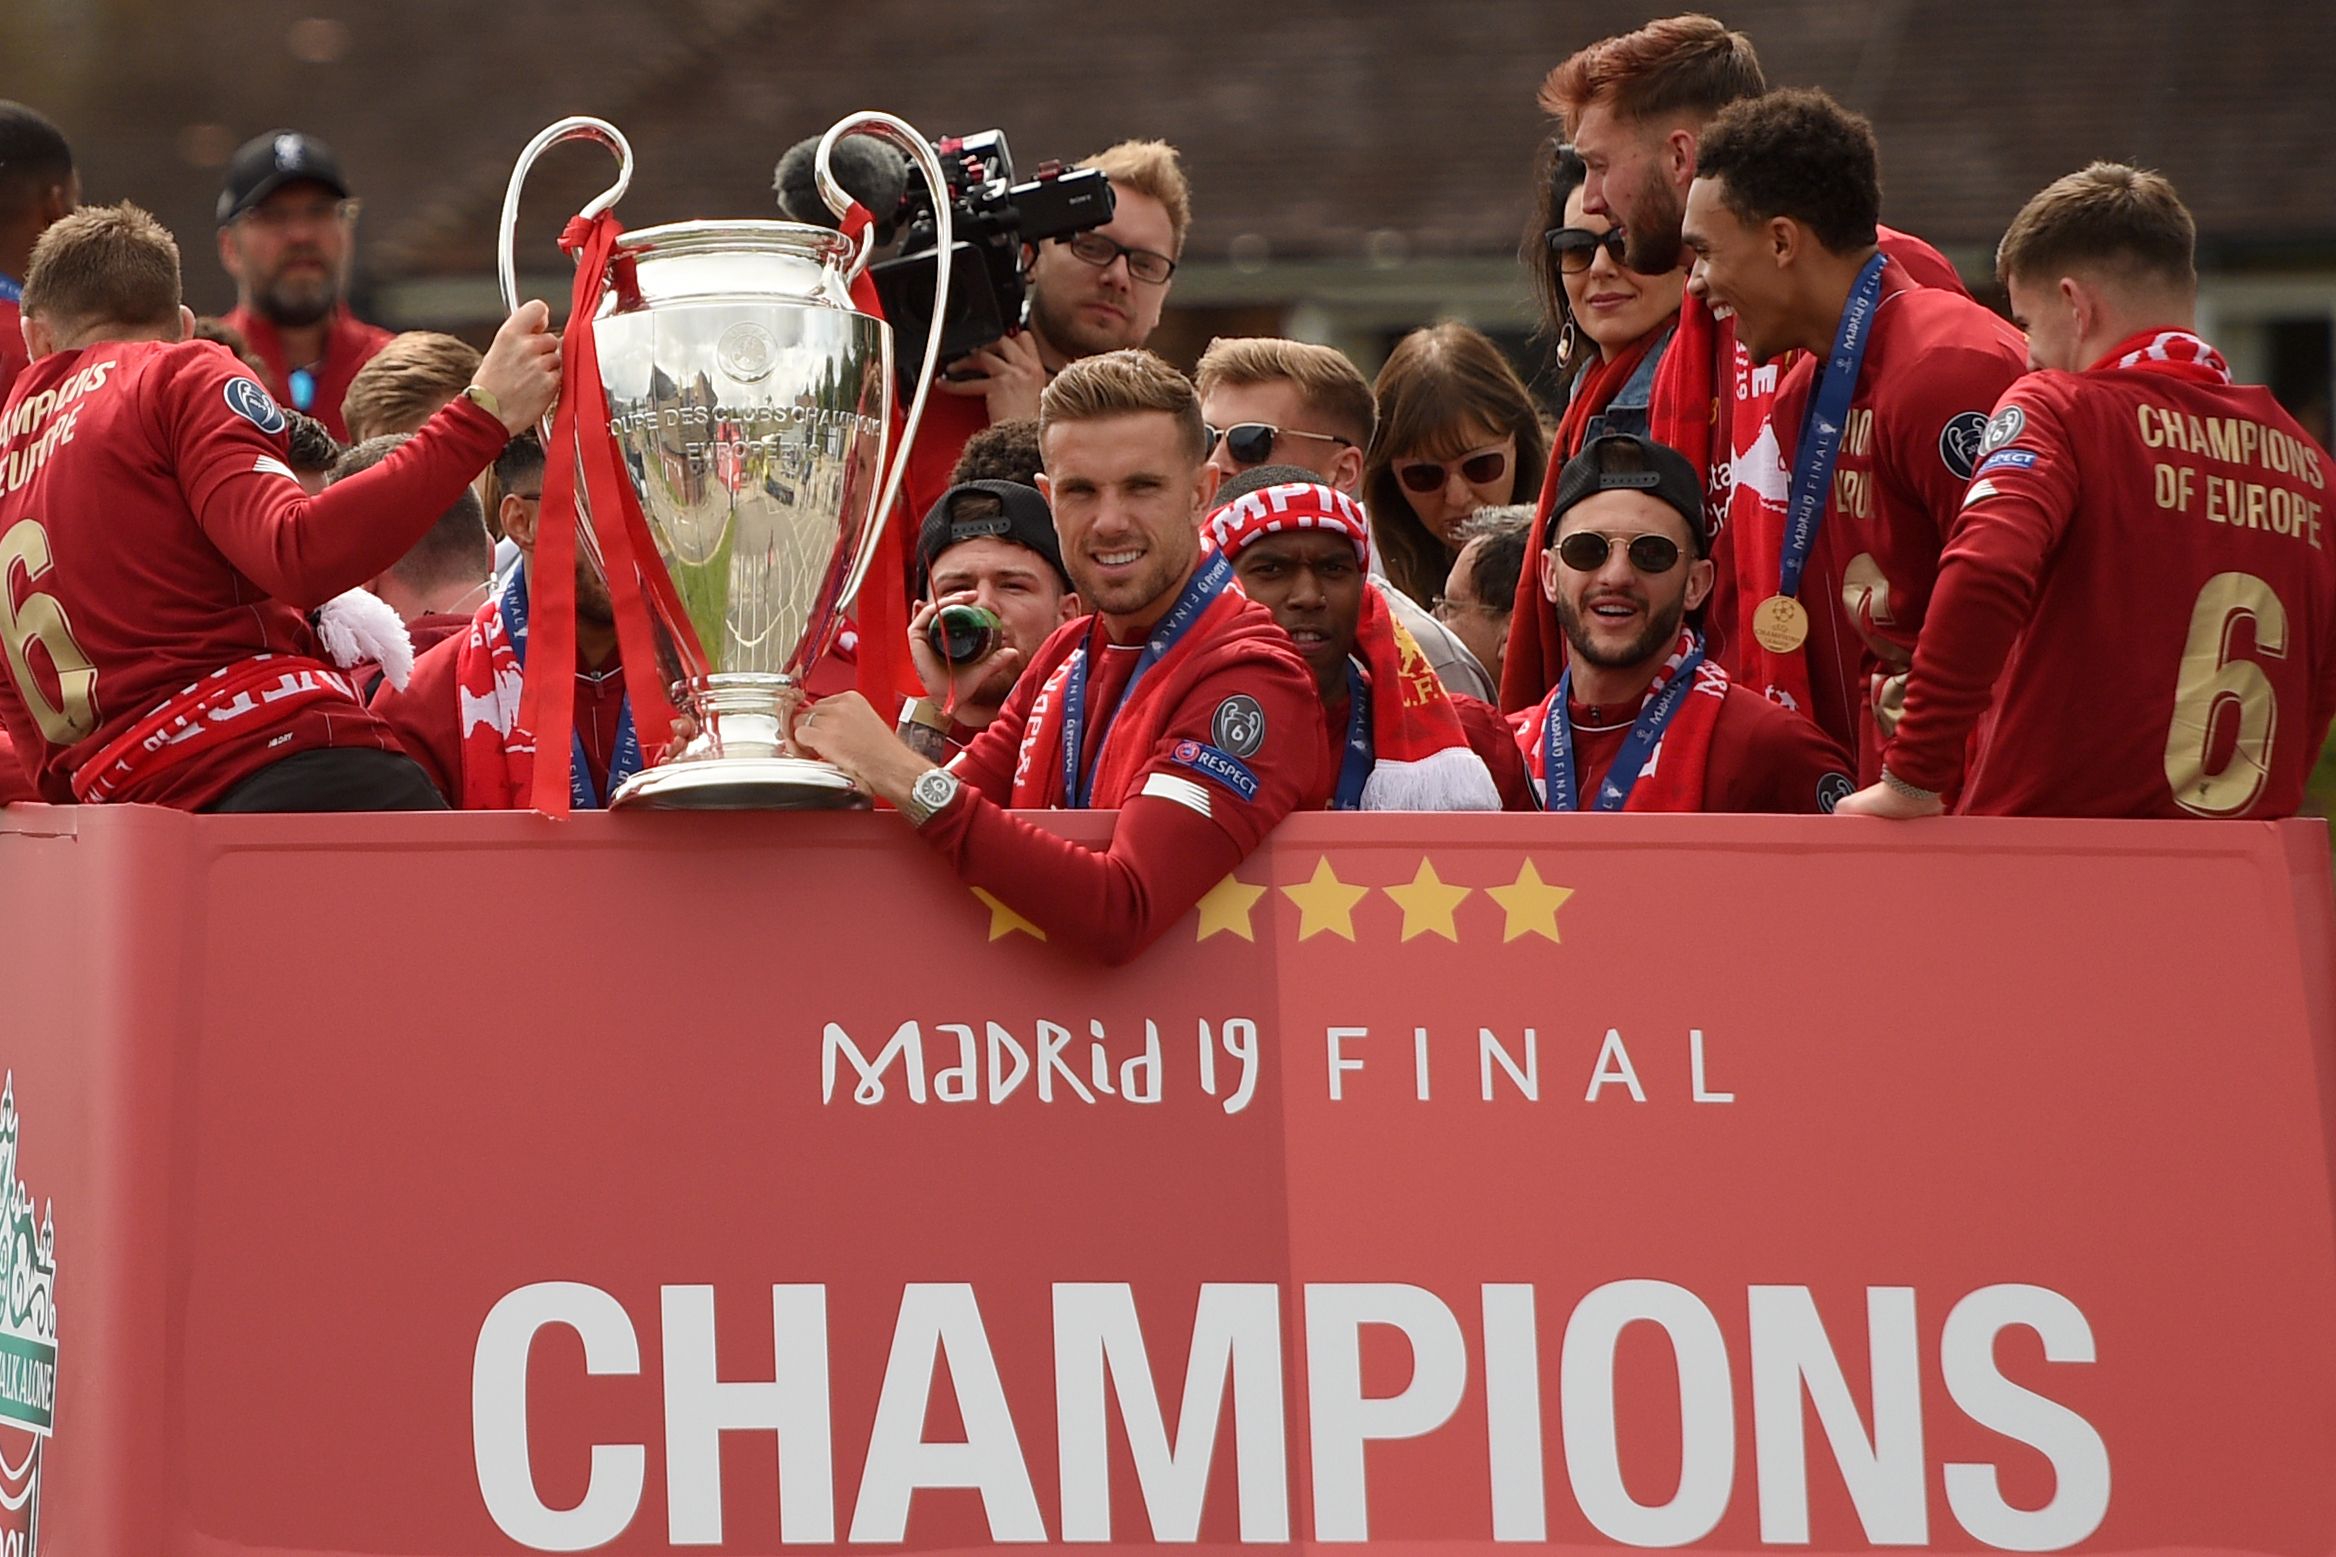 Liverpool Parade 2019: Twitter Reaction, Photo, Videos and More After UCL Win. Bleacher Report. Latest News, Videos and Highlights